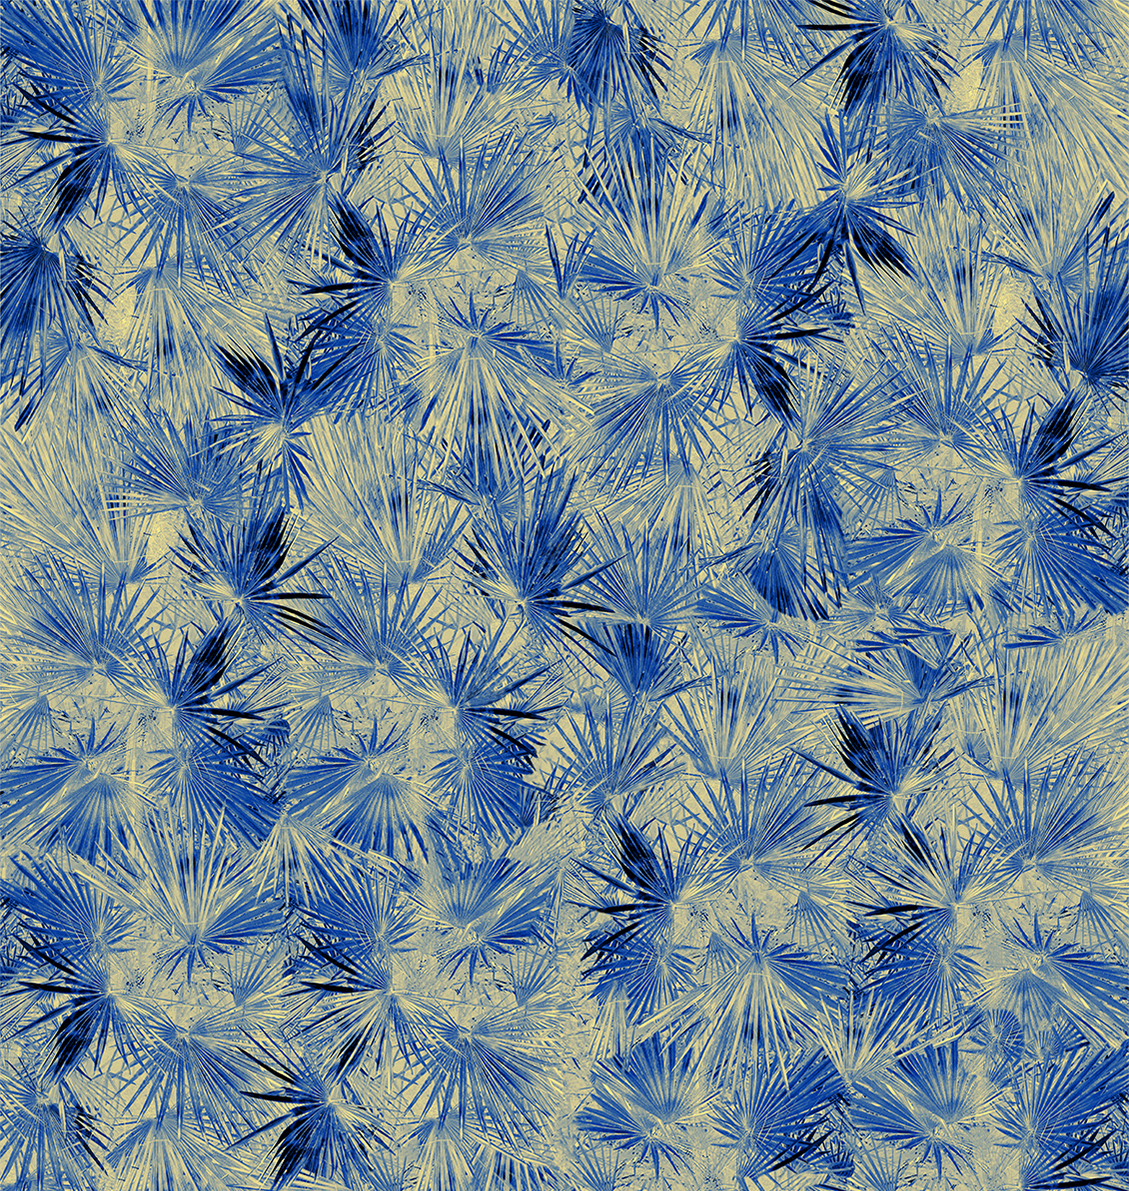 Tropical wallpaper with palm leaf design in various shades of blue and yellow